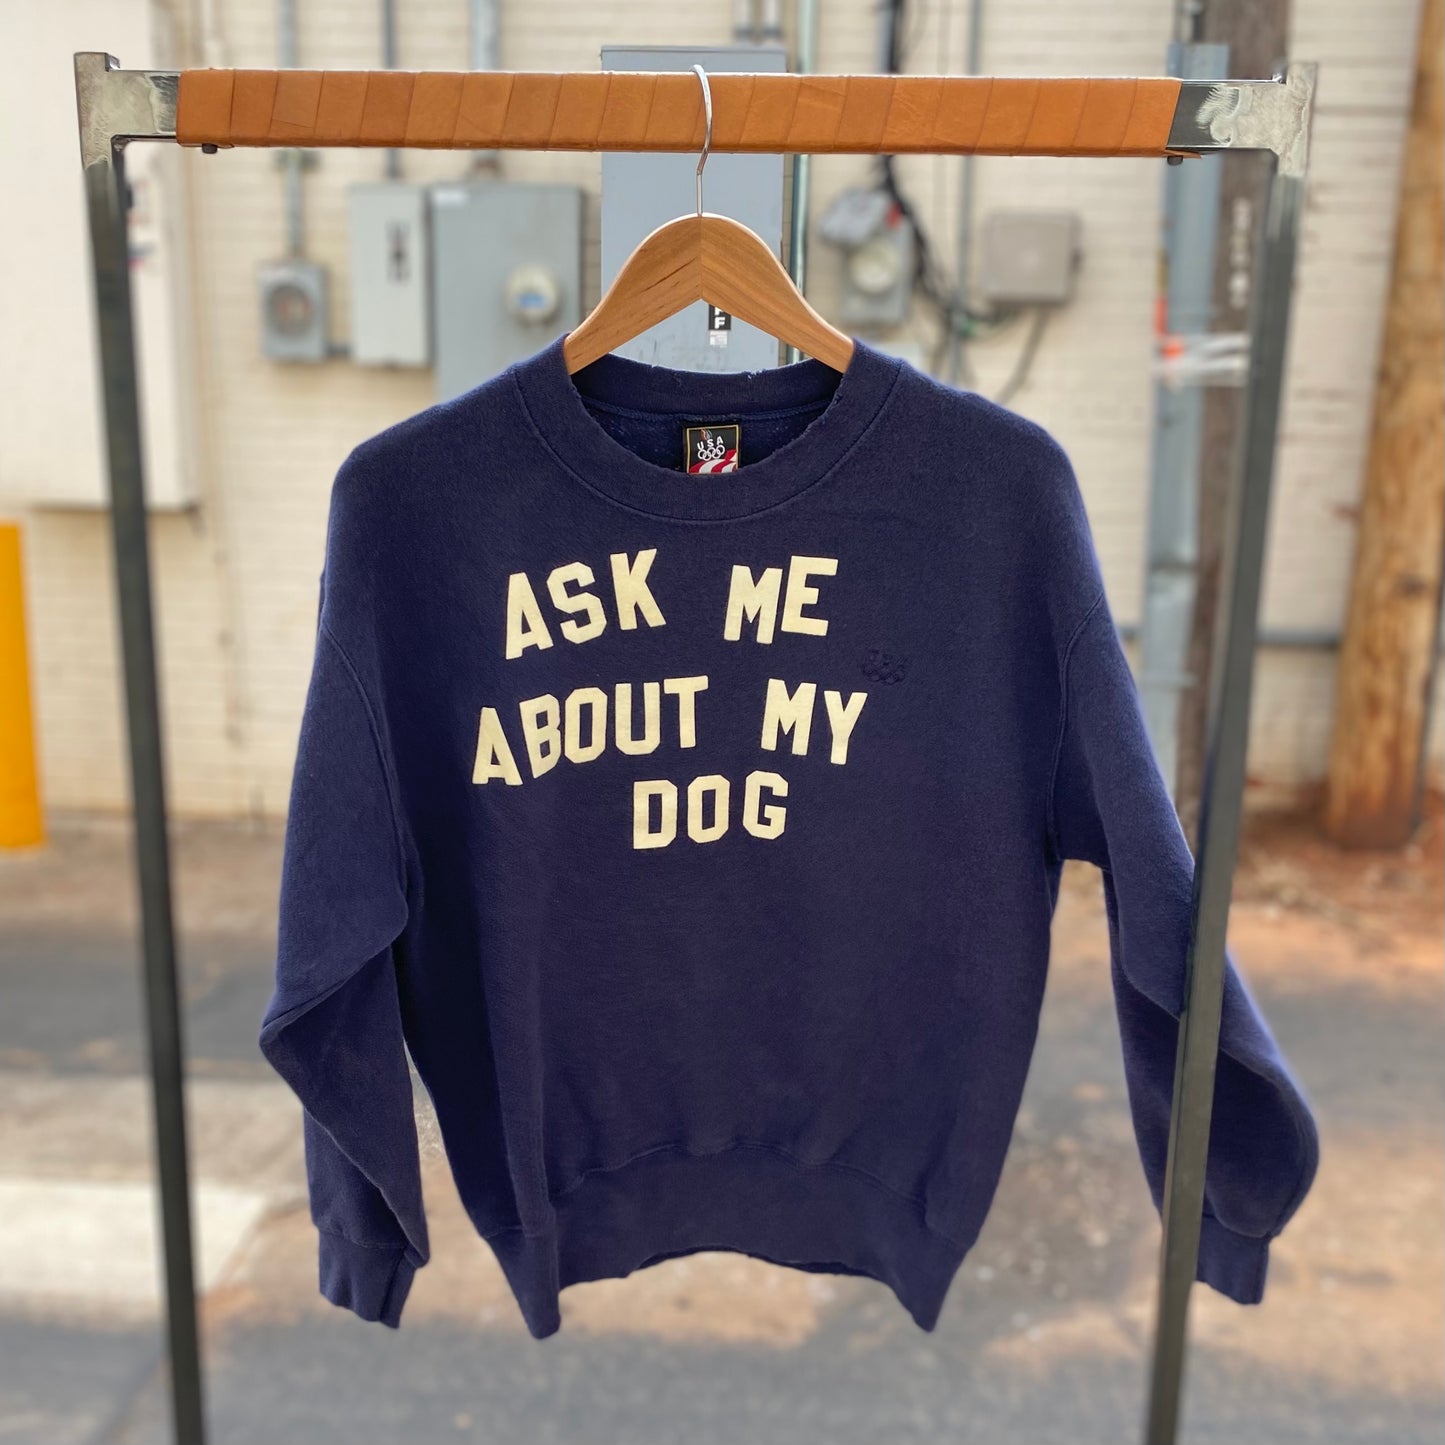 How's Your Dog One of a Kind Vintage Sweatshirt